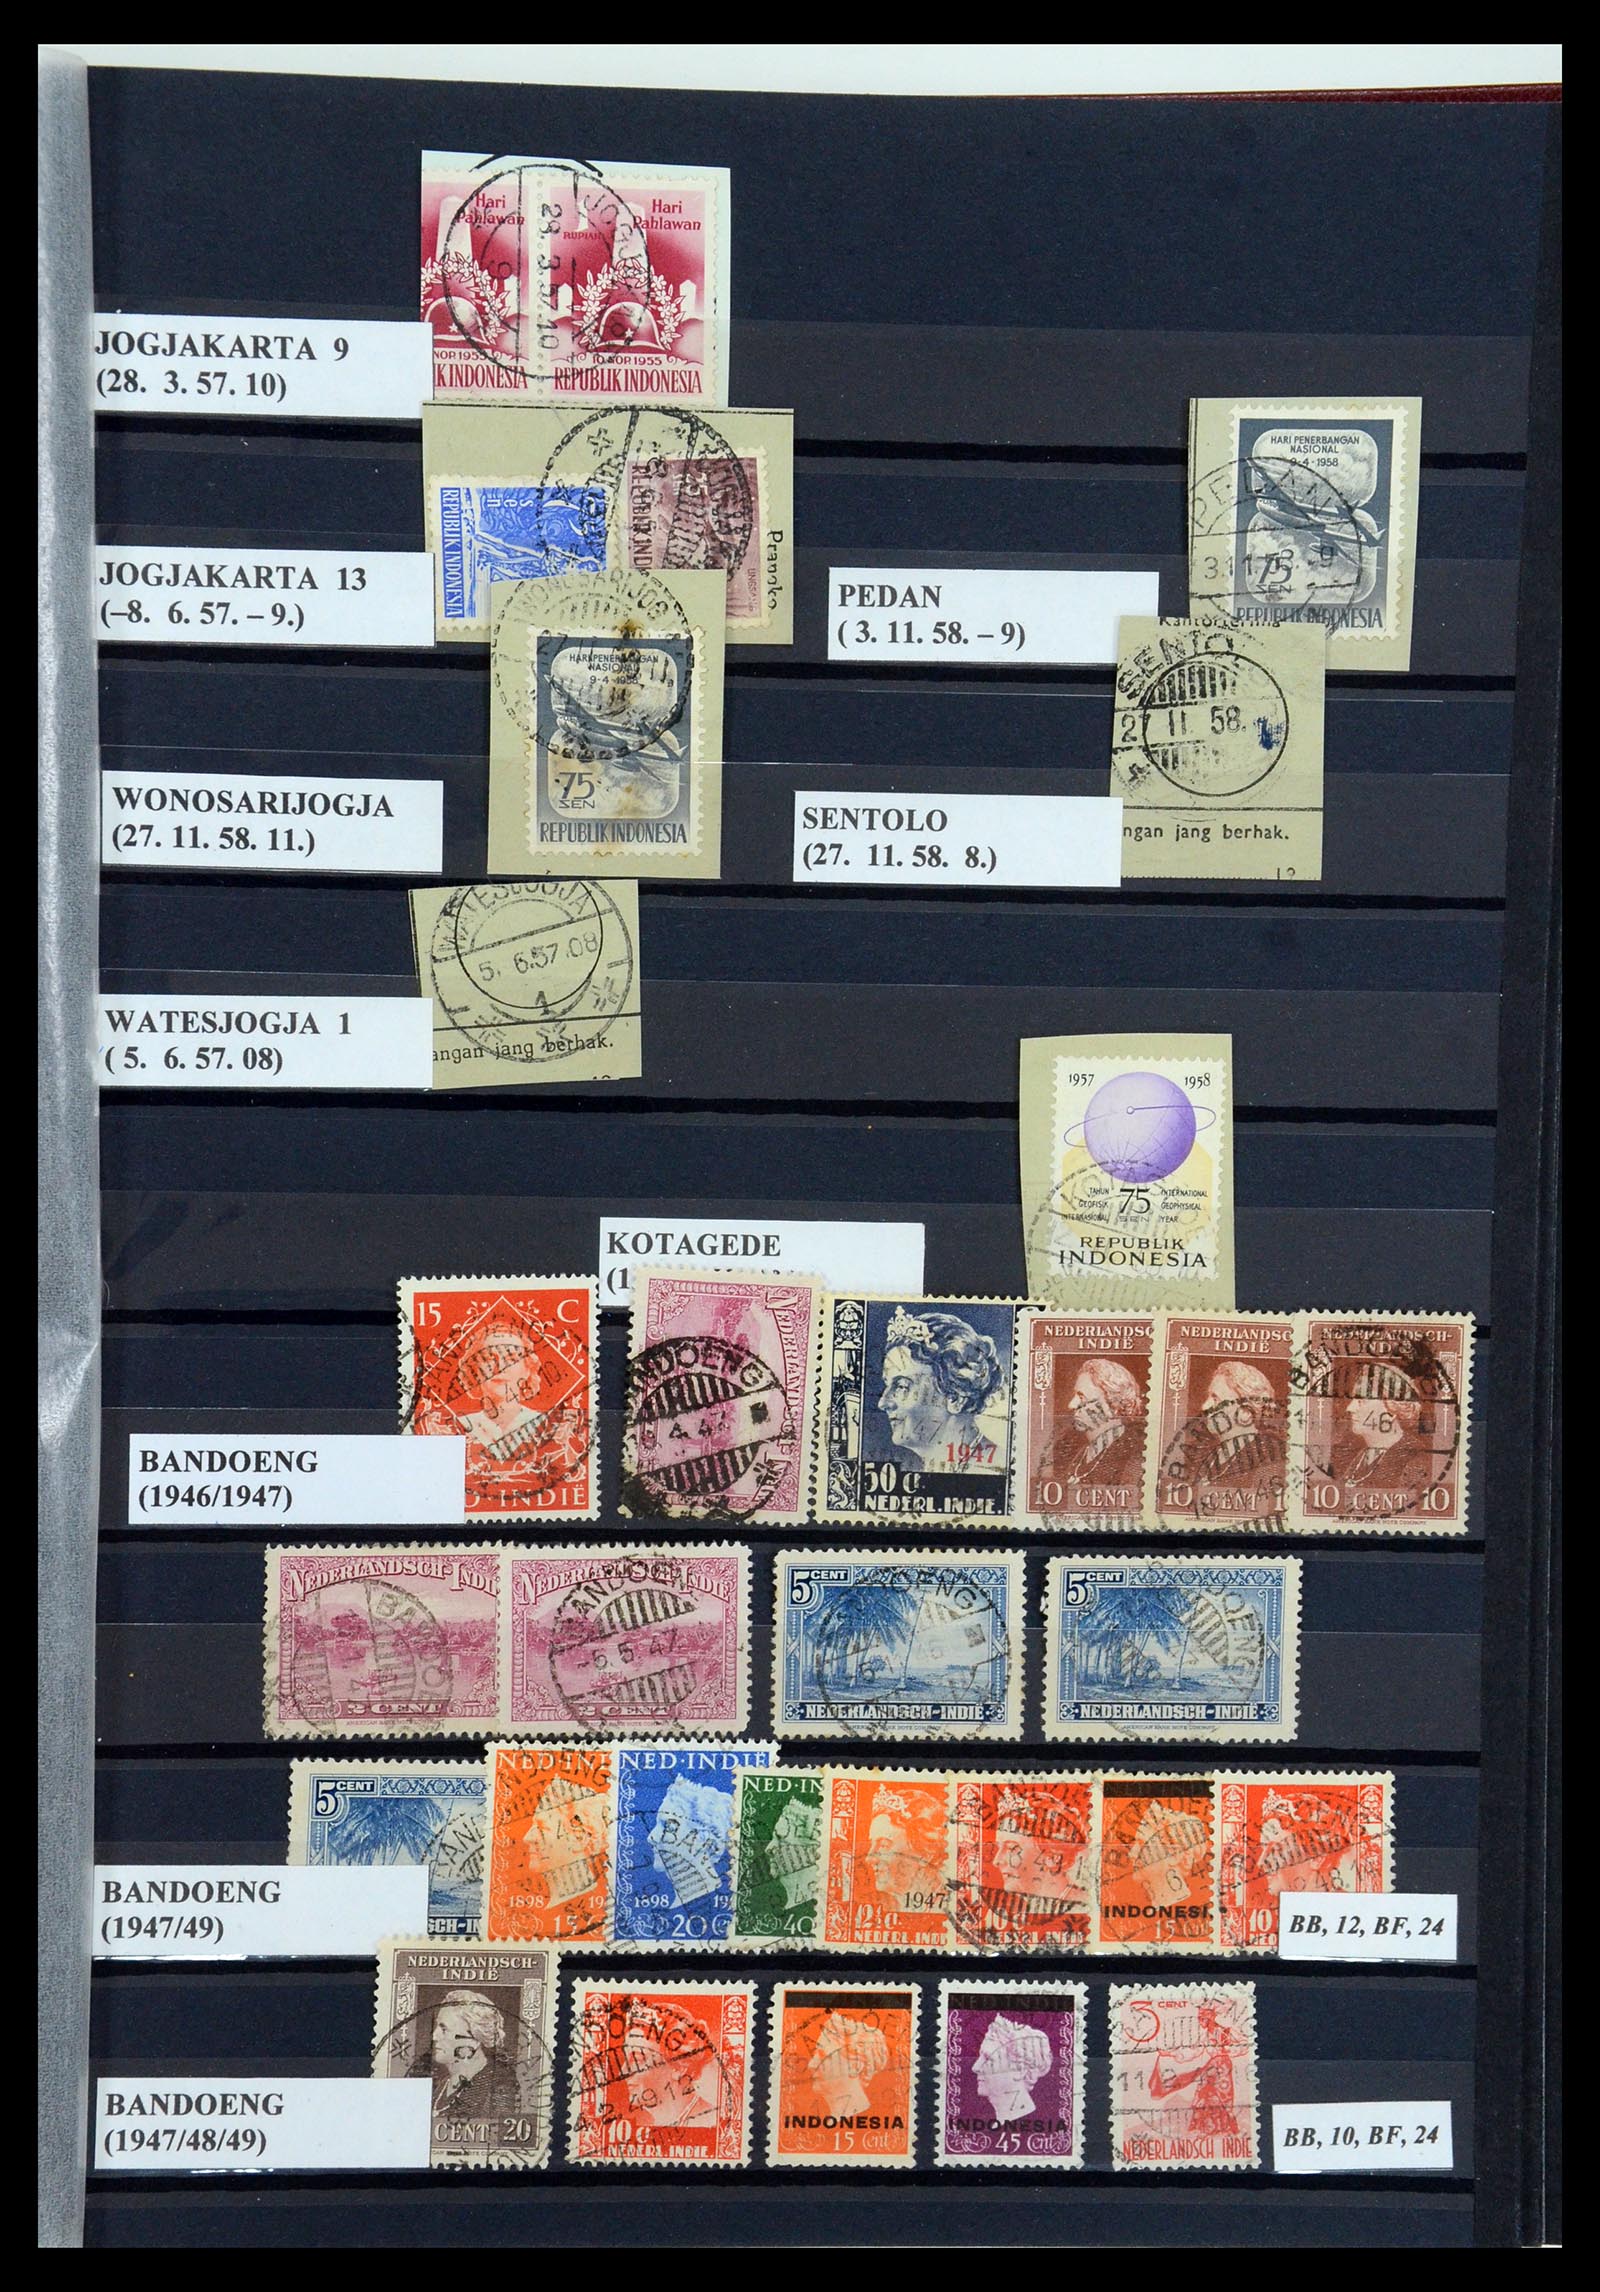 35612 071 - Stamp Collection 35612 Dutch east Indies cancels.